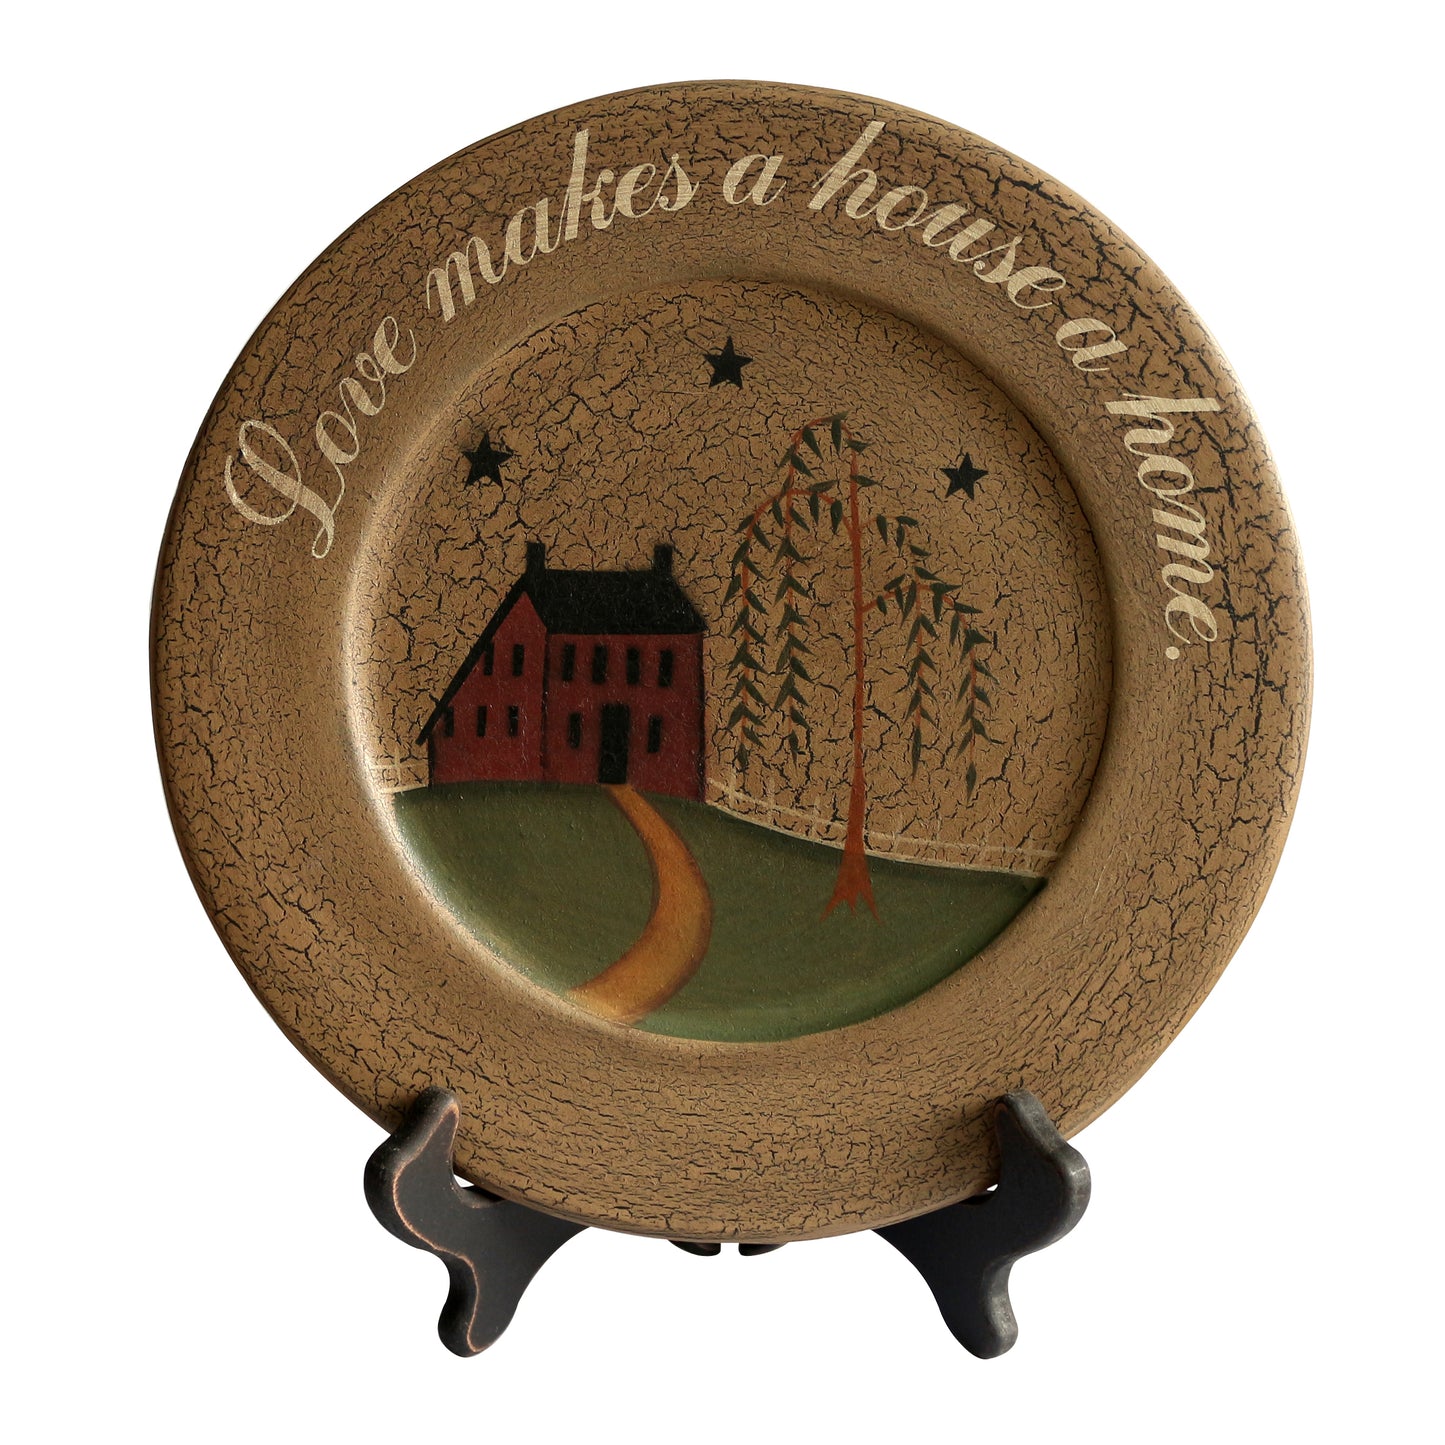 CVHOMEDECO. Primitive Country House Willow Tree Footpath Wood Decorative Plate Round Crackled Display Wooden Plate Home Décor Art, 9.75 Inch